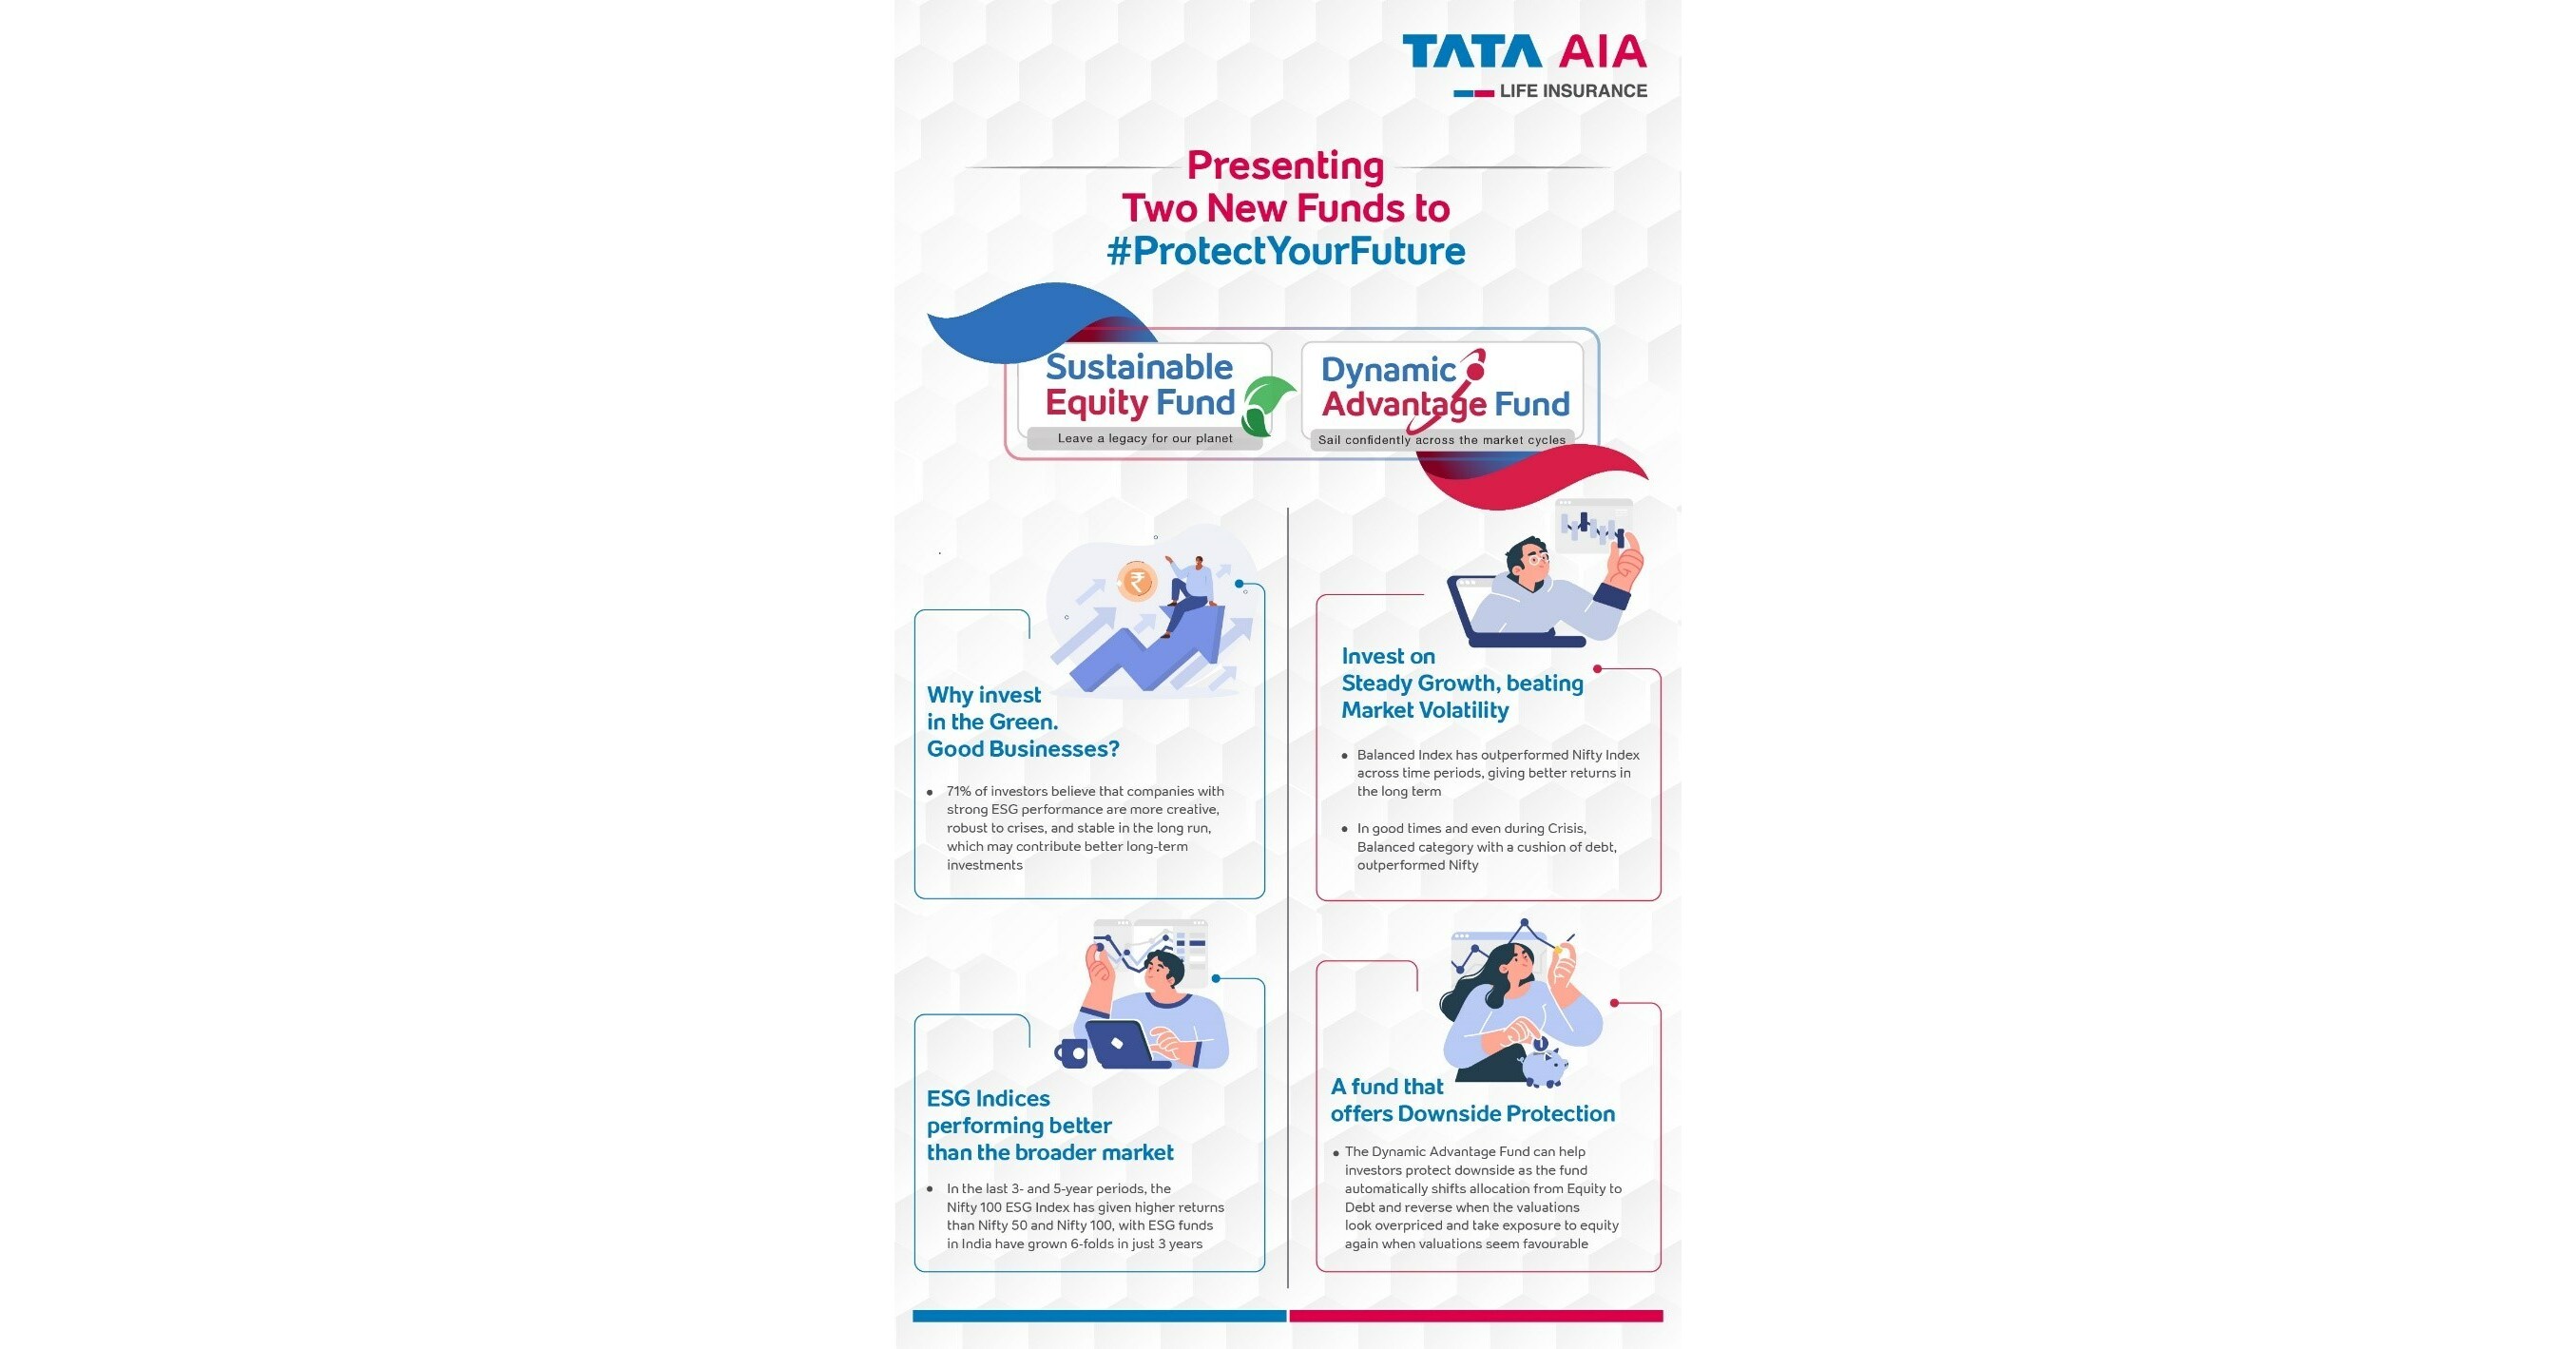 tata-aia-life-insurance-launches-nfo-offerings